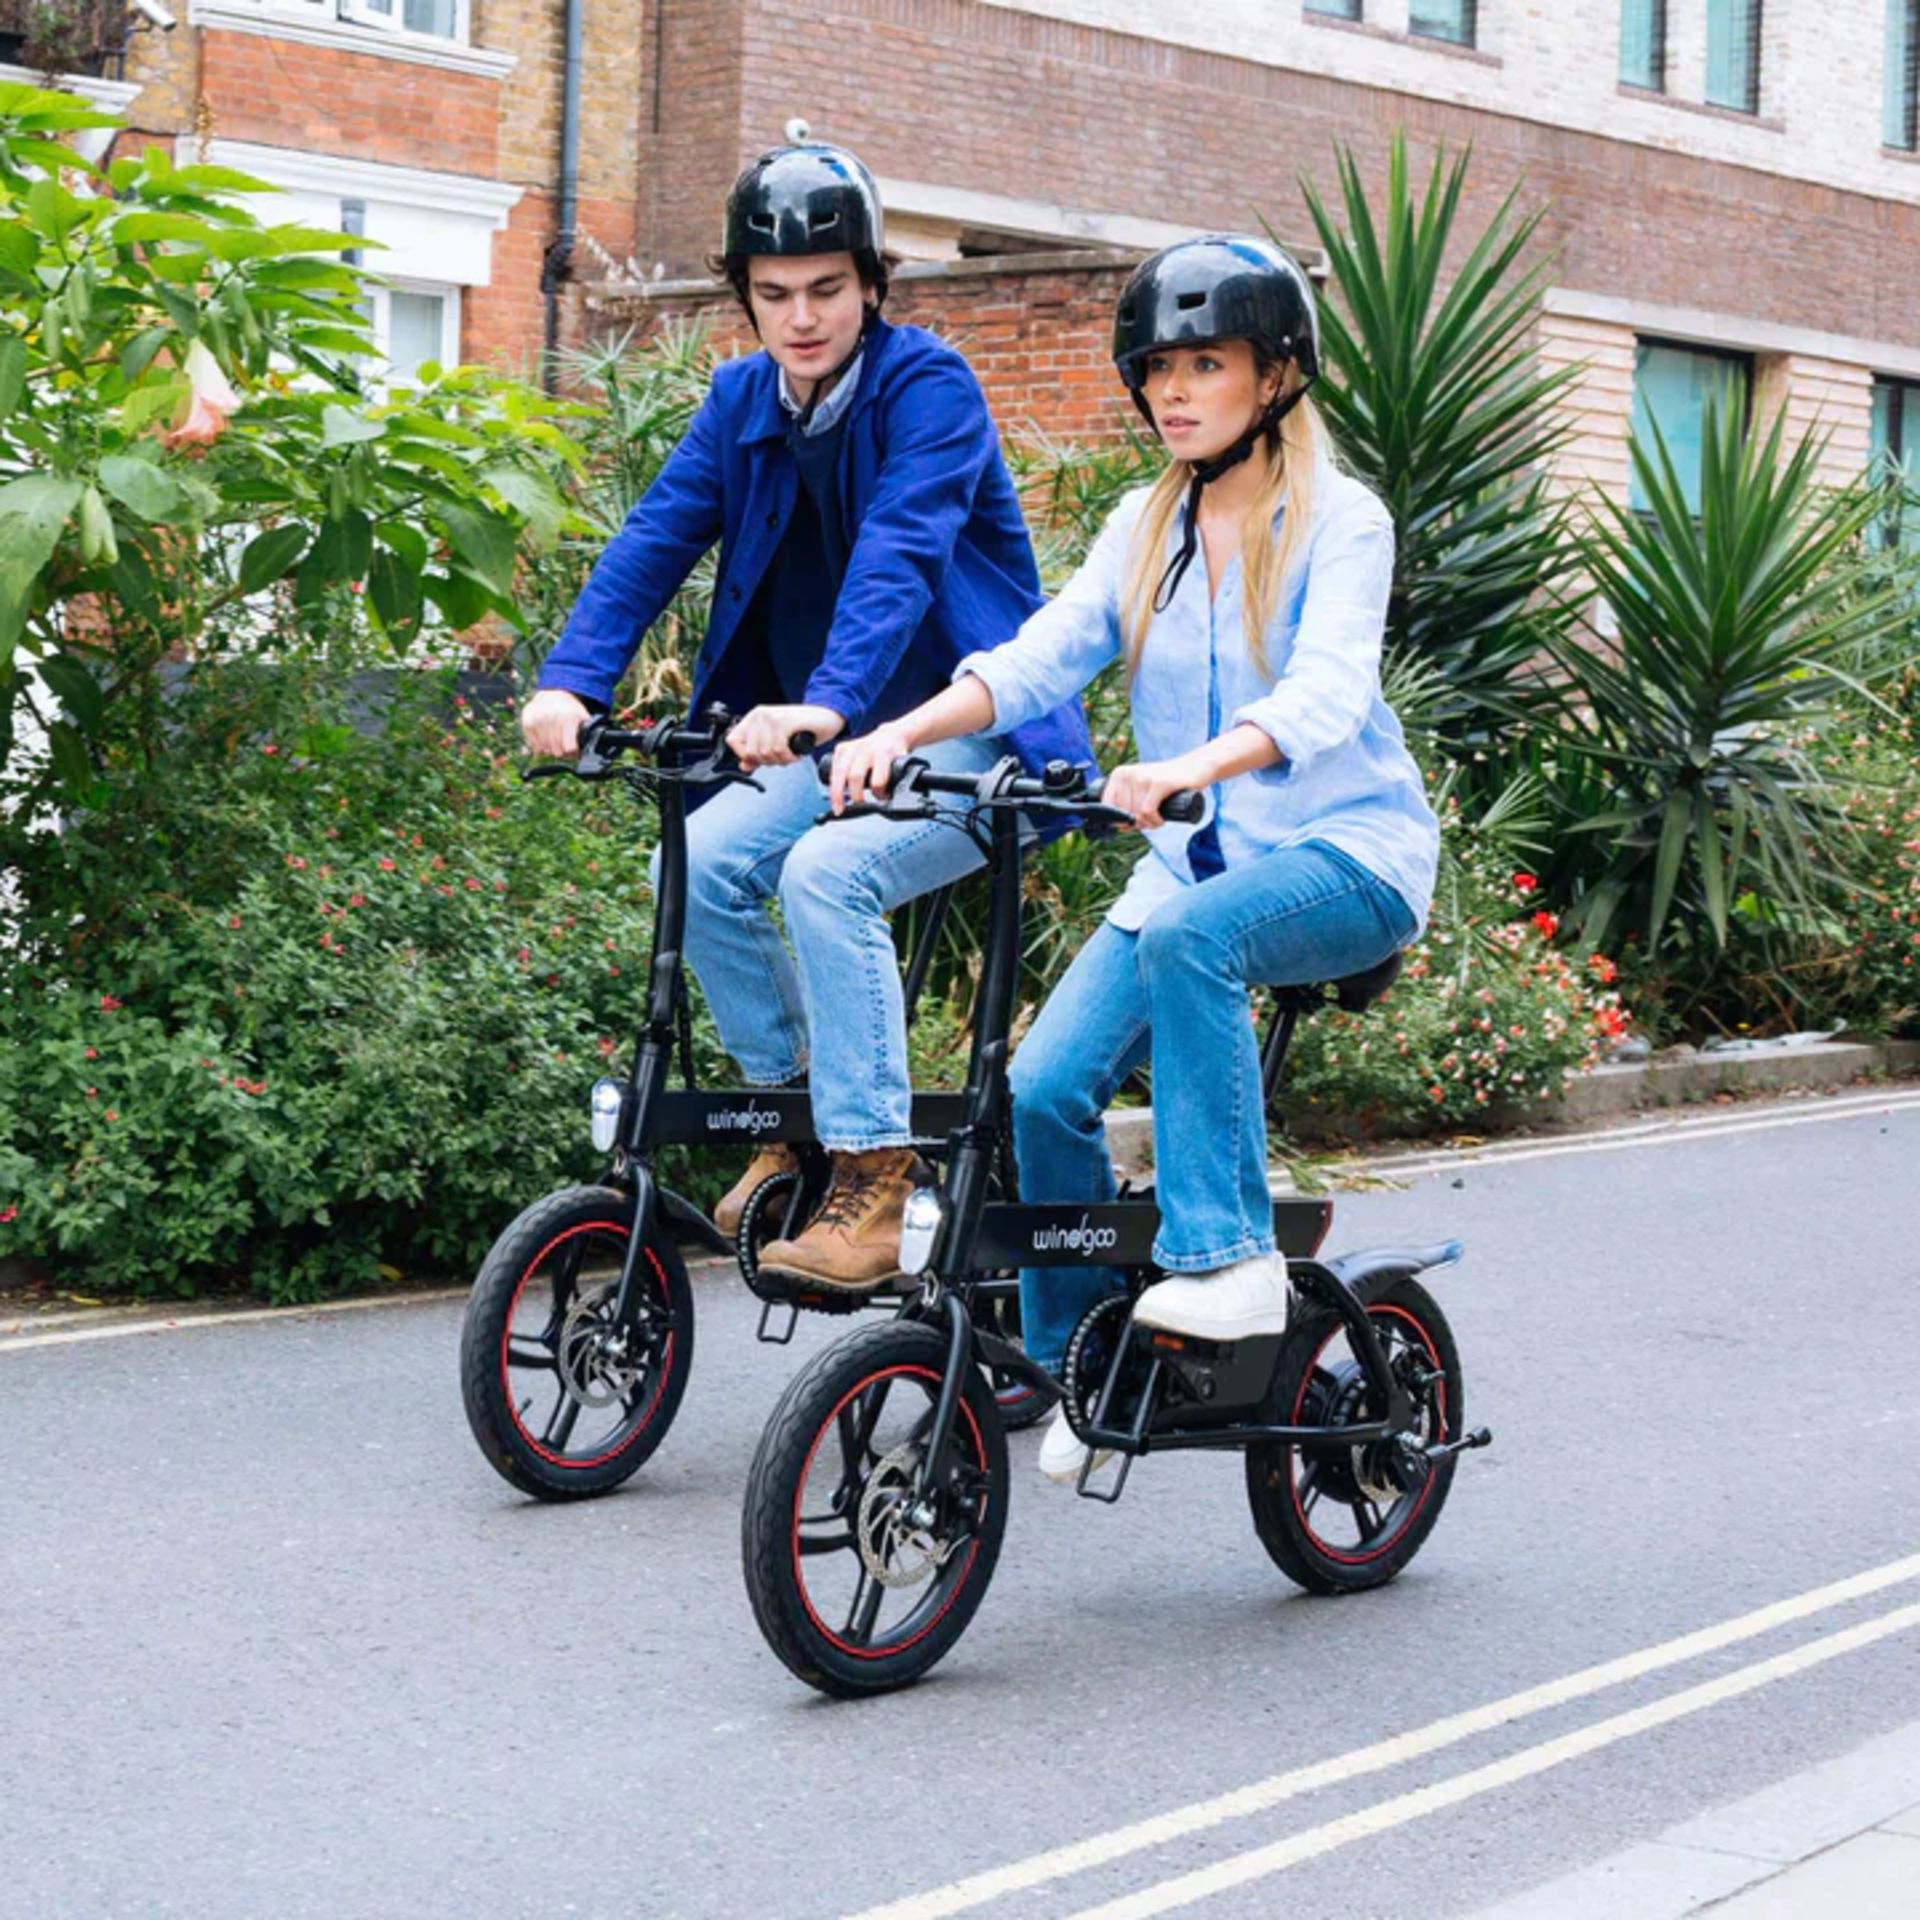 Windgoo B20 Pro Electric Bike. RRP £1,100.99. With 16-inch-wide tires and a frame of upgraded - Bild 4 aus 7